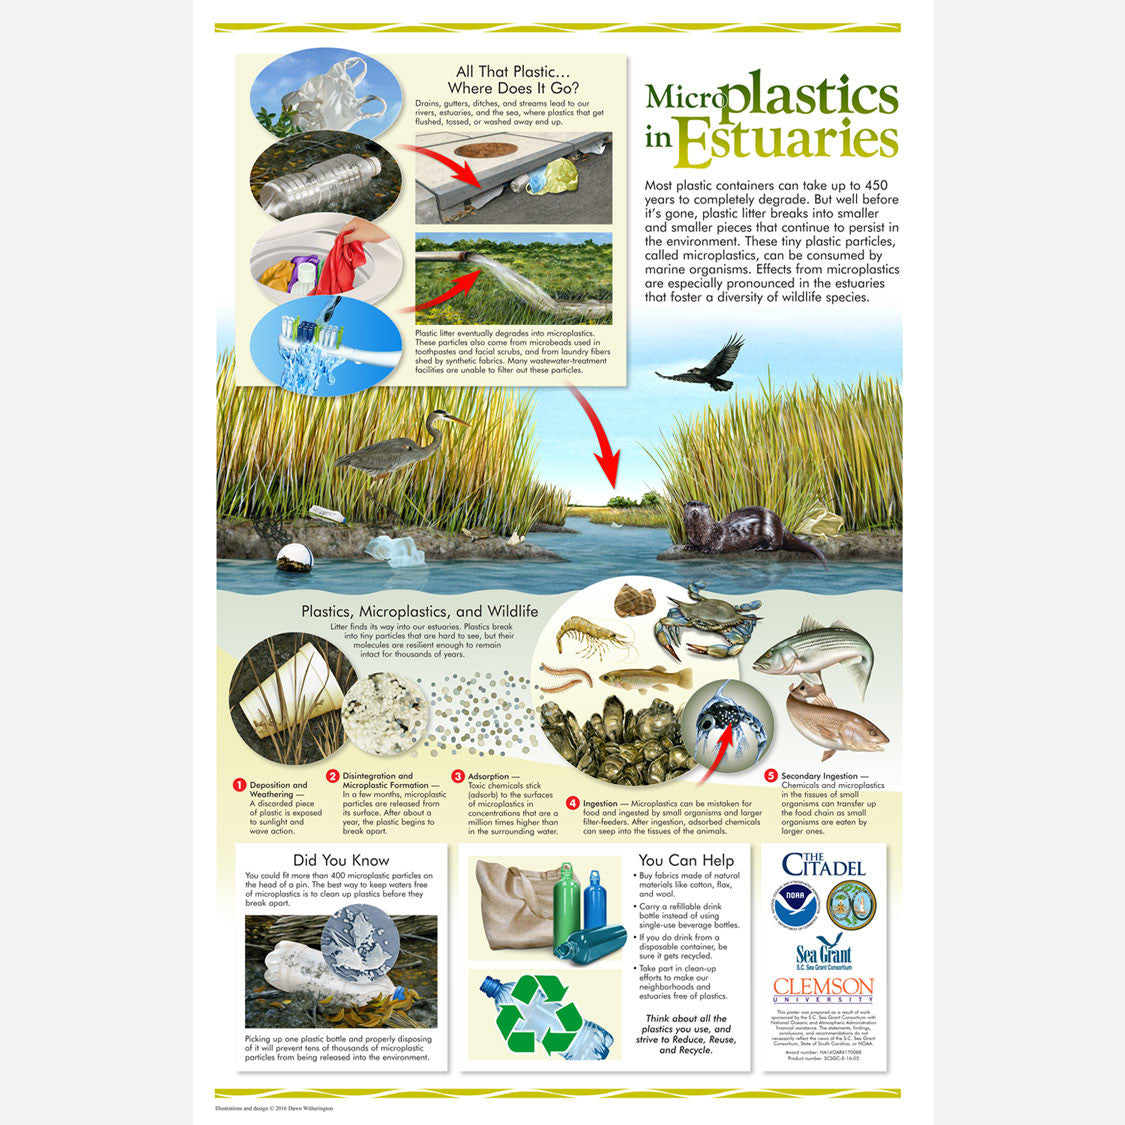 This beautiful poster provides information on the harmful plastics and microplastics that enter our estuaries.